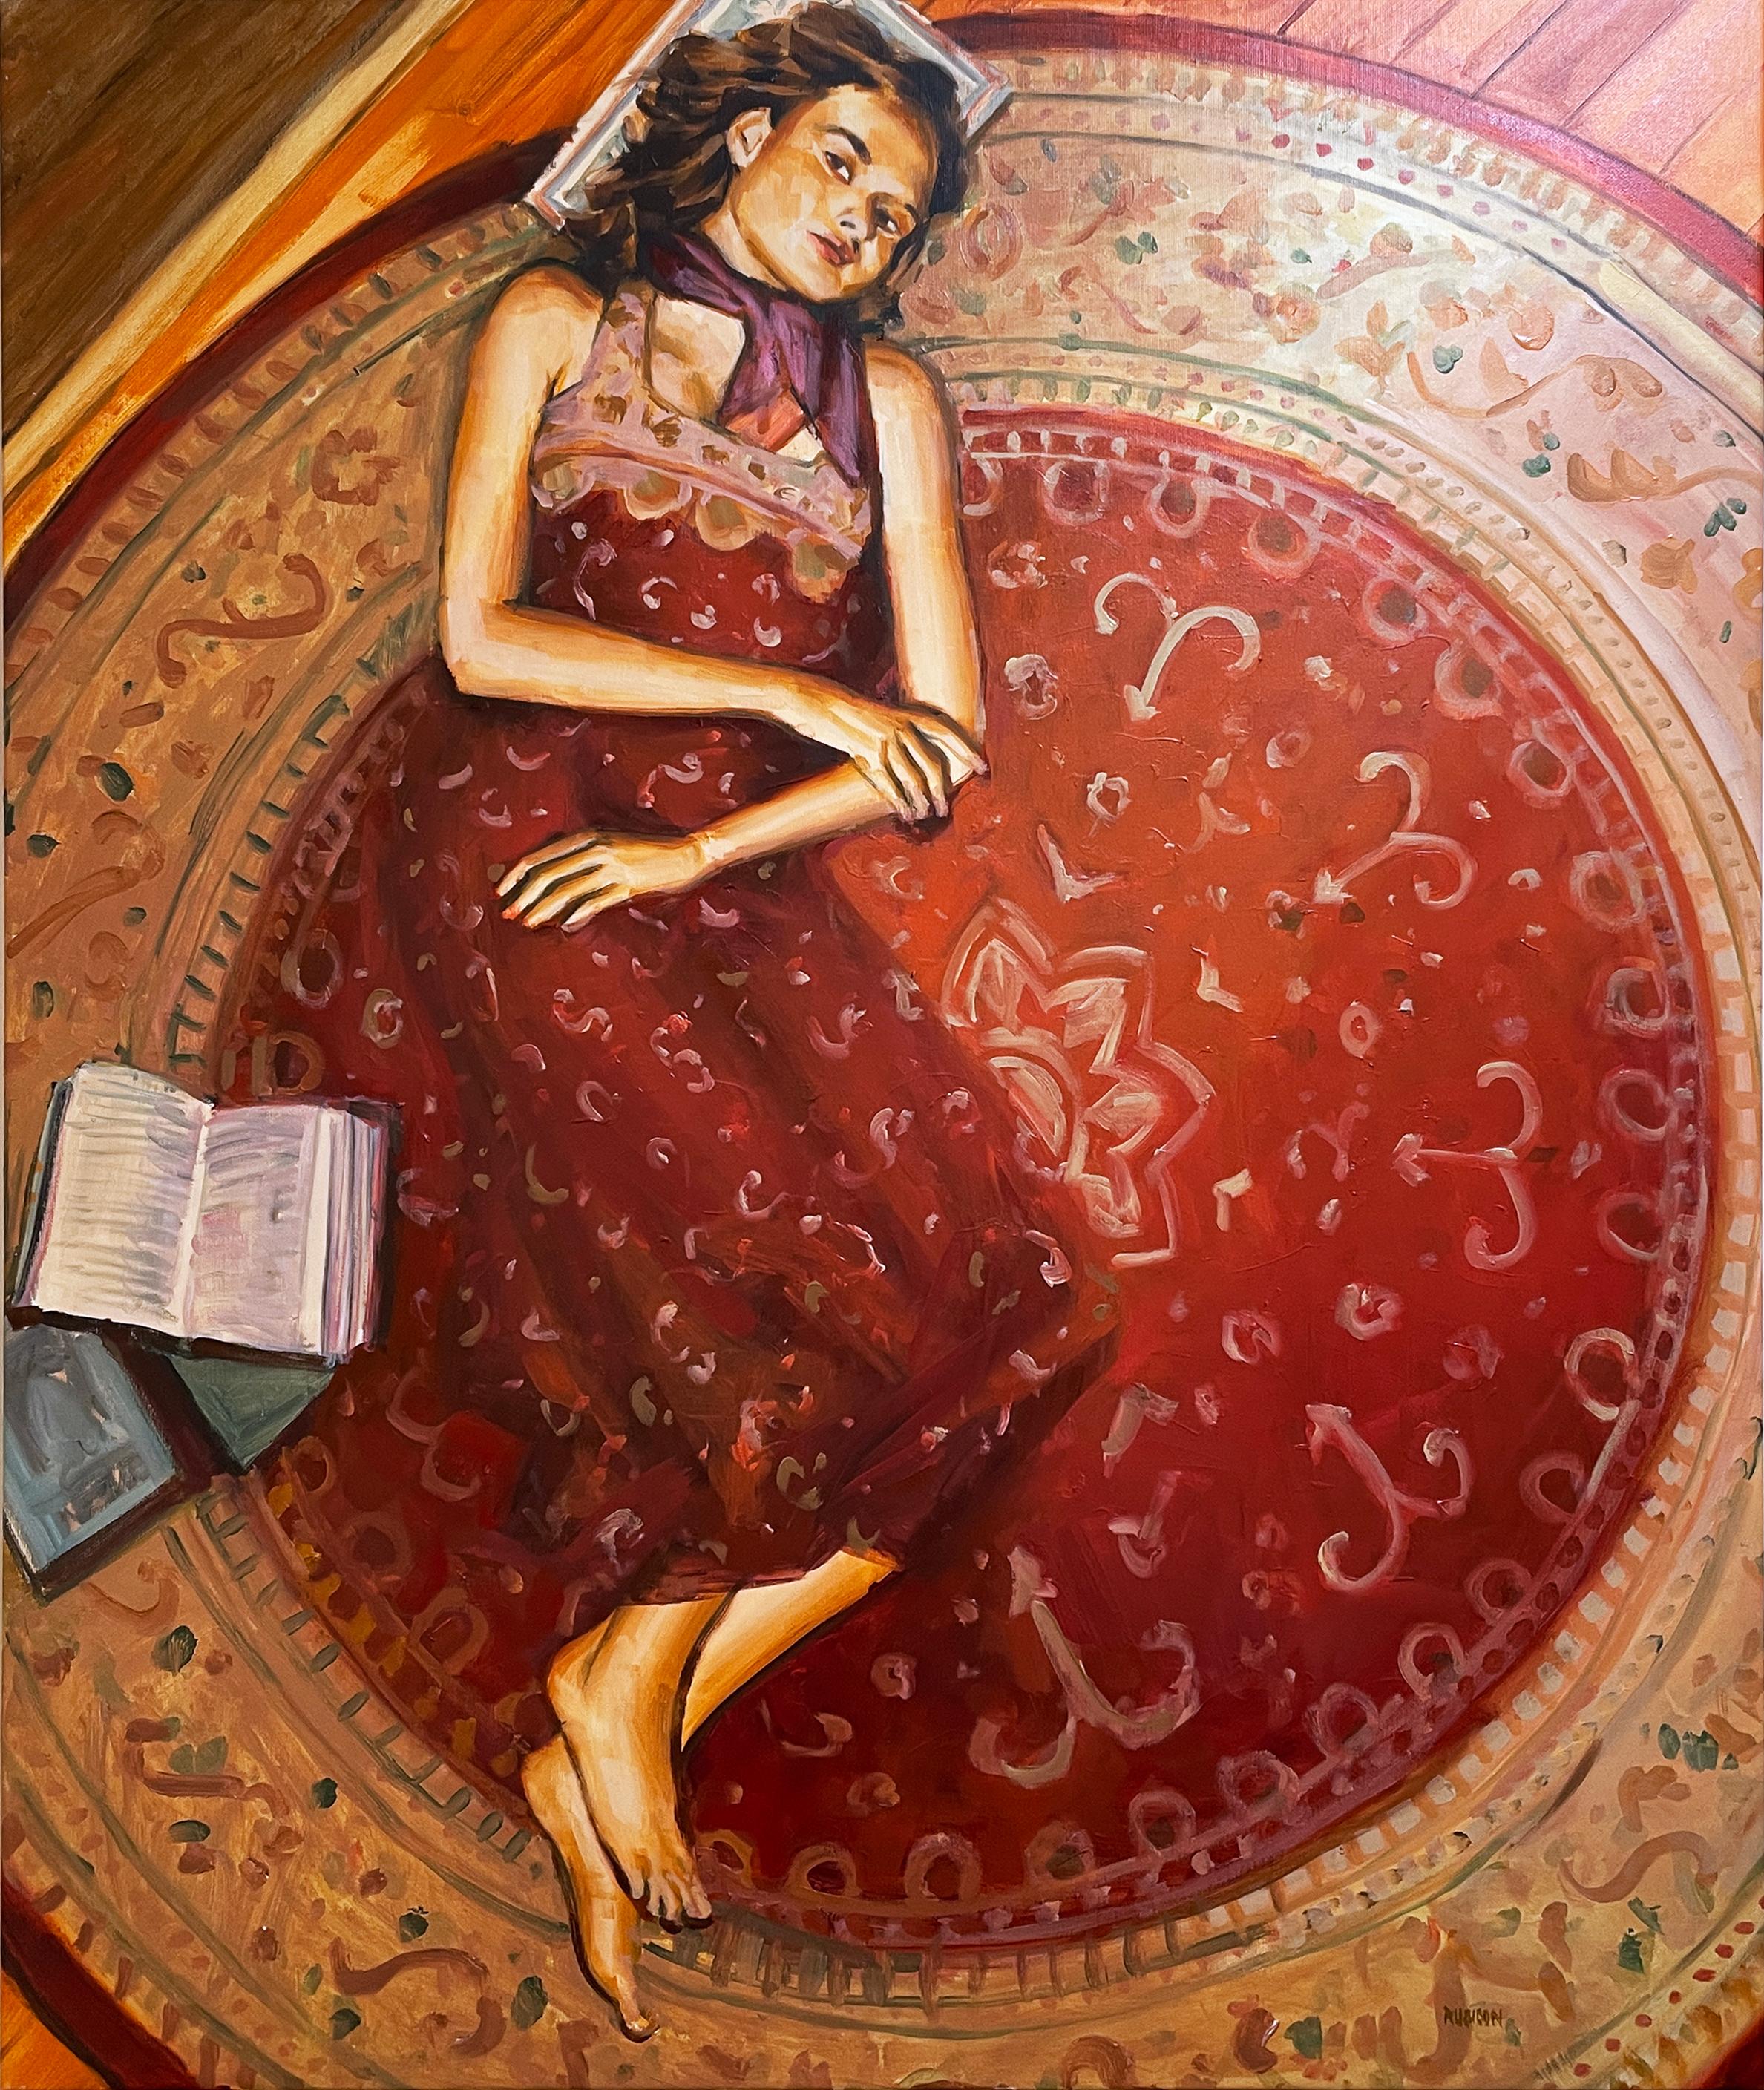 RU8ICON1 Figurative Painting - Day Dreaming (2022) oil on canvas, figurative, woman with books, red, pattern